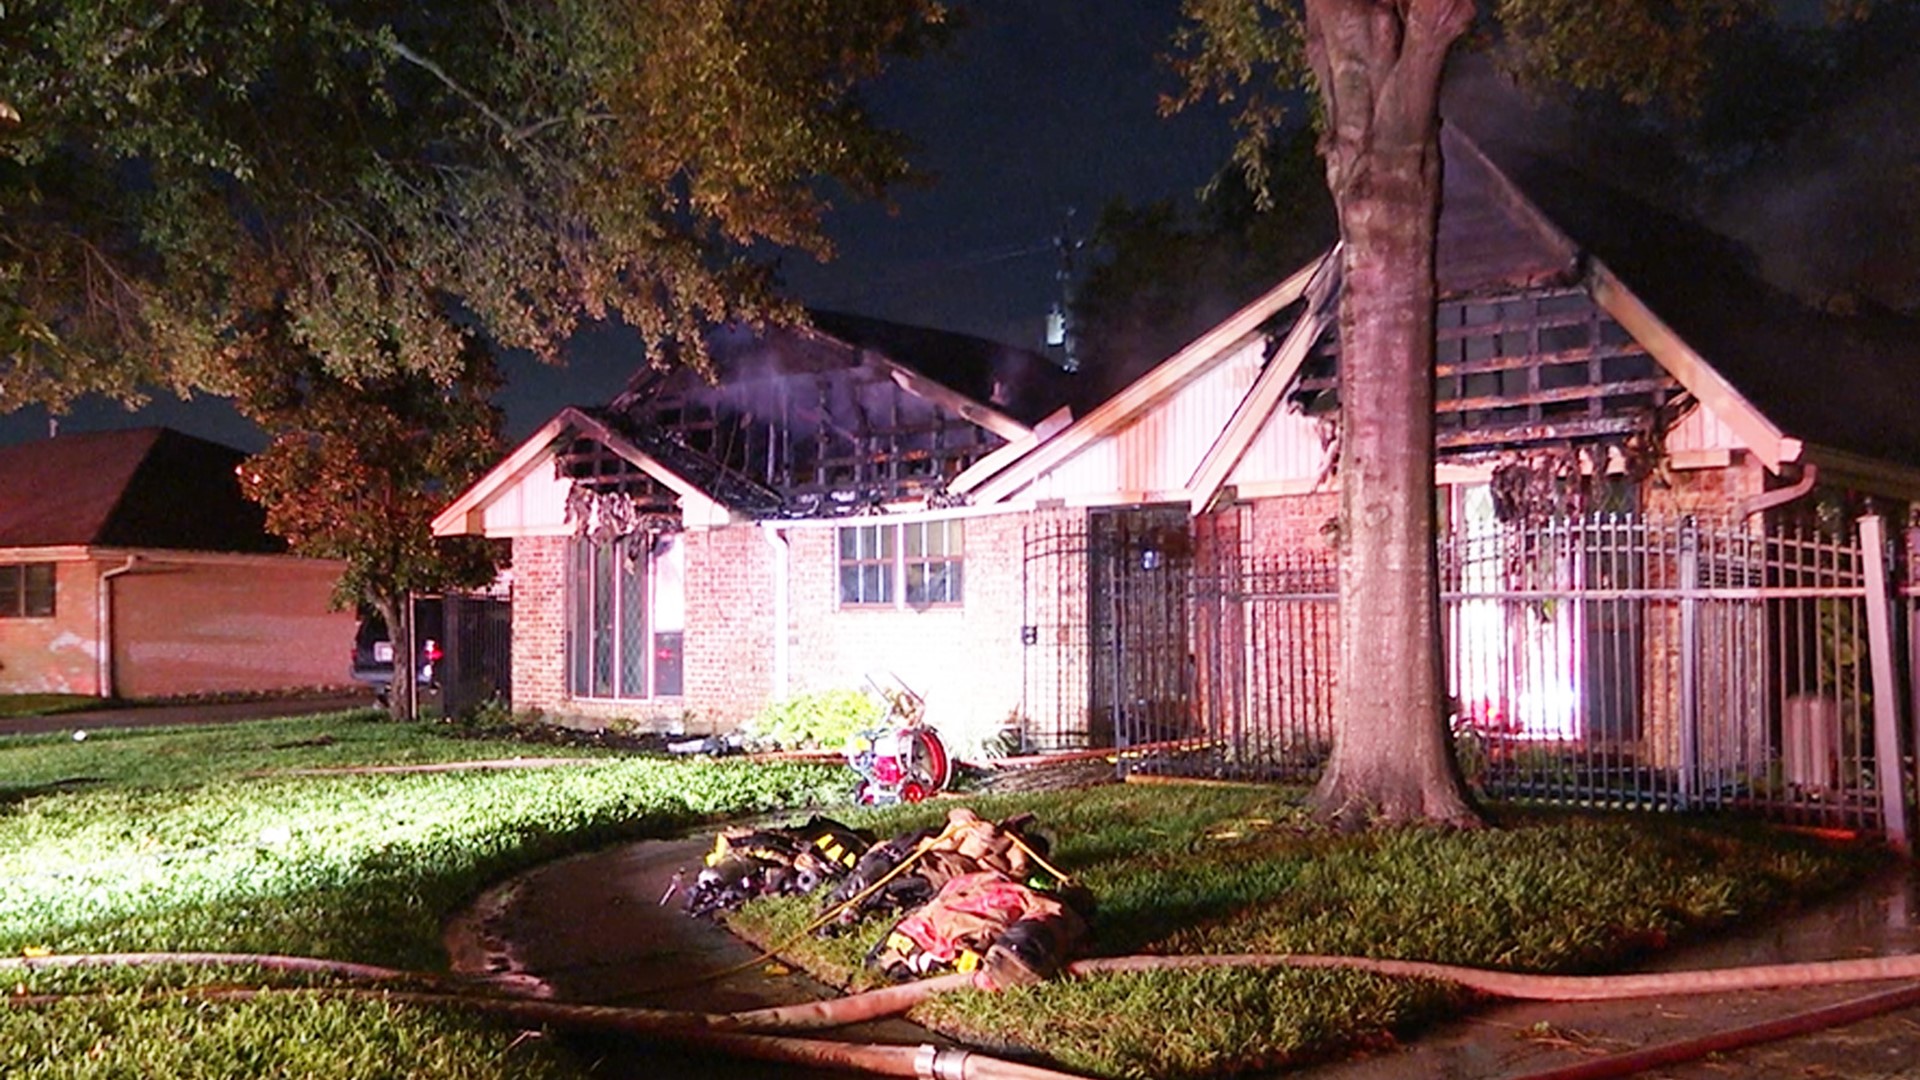 The firefighters were hit by a small collapse, HFD says